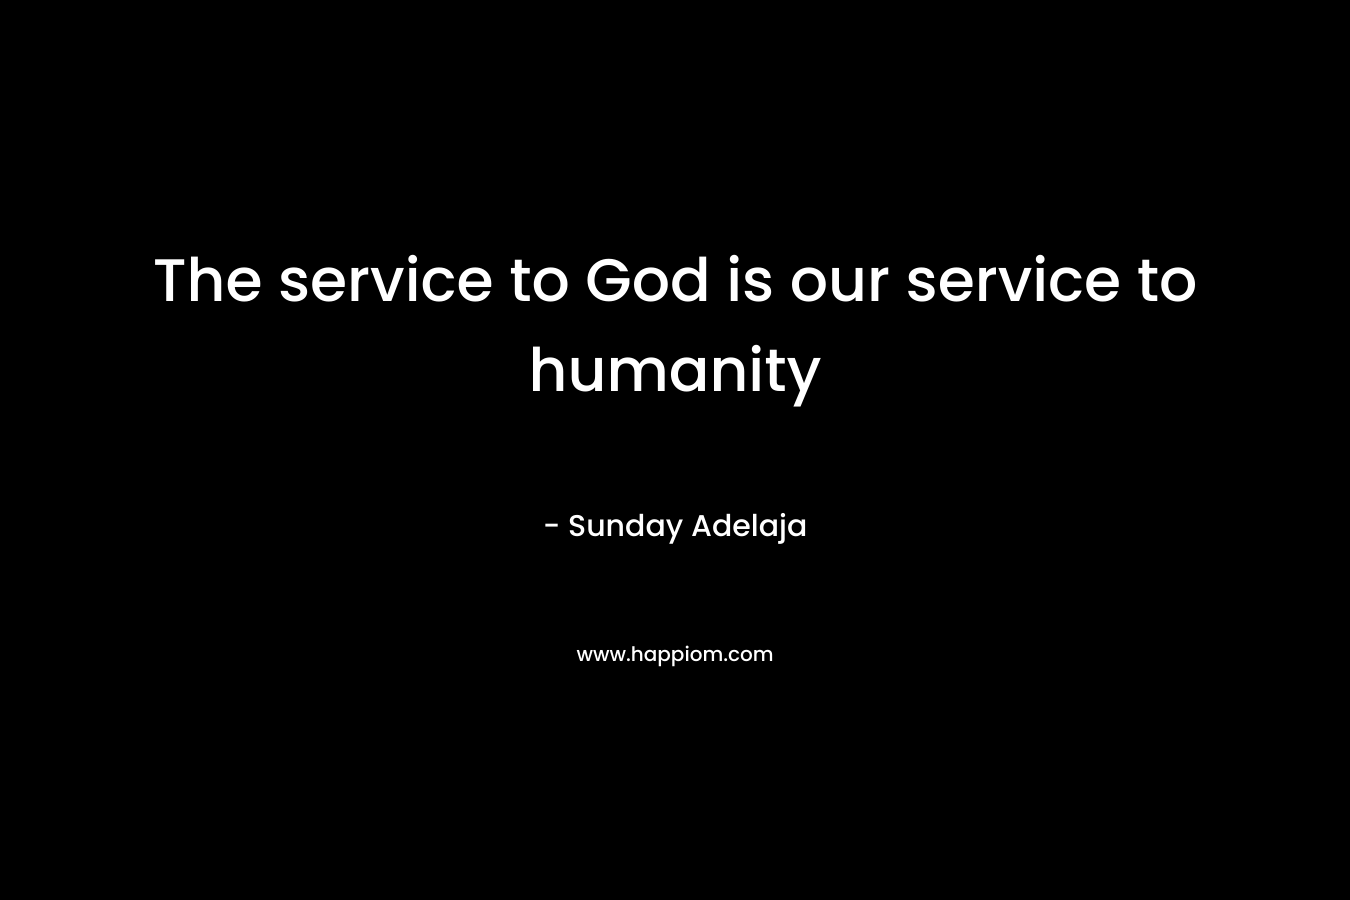 The service to God is our service to humanity